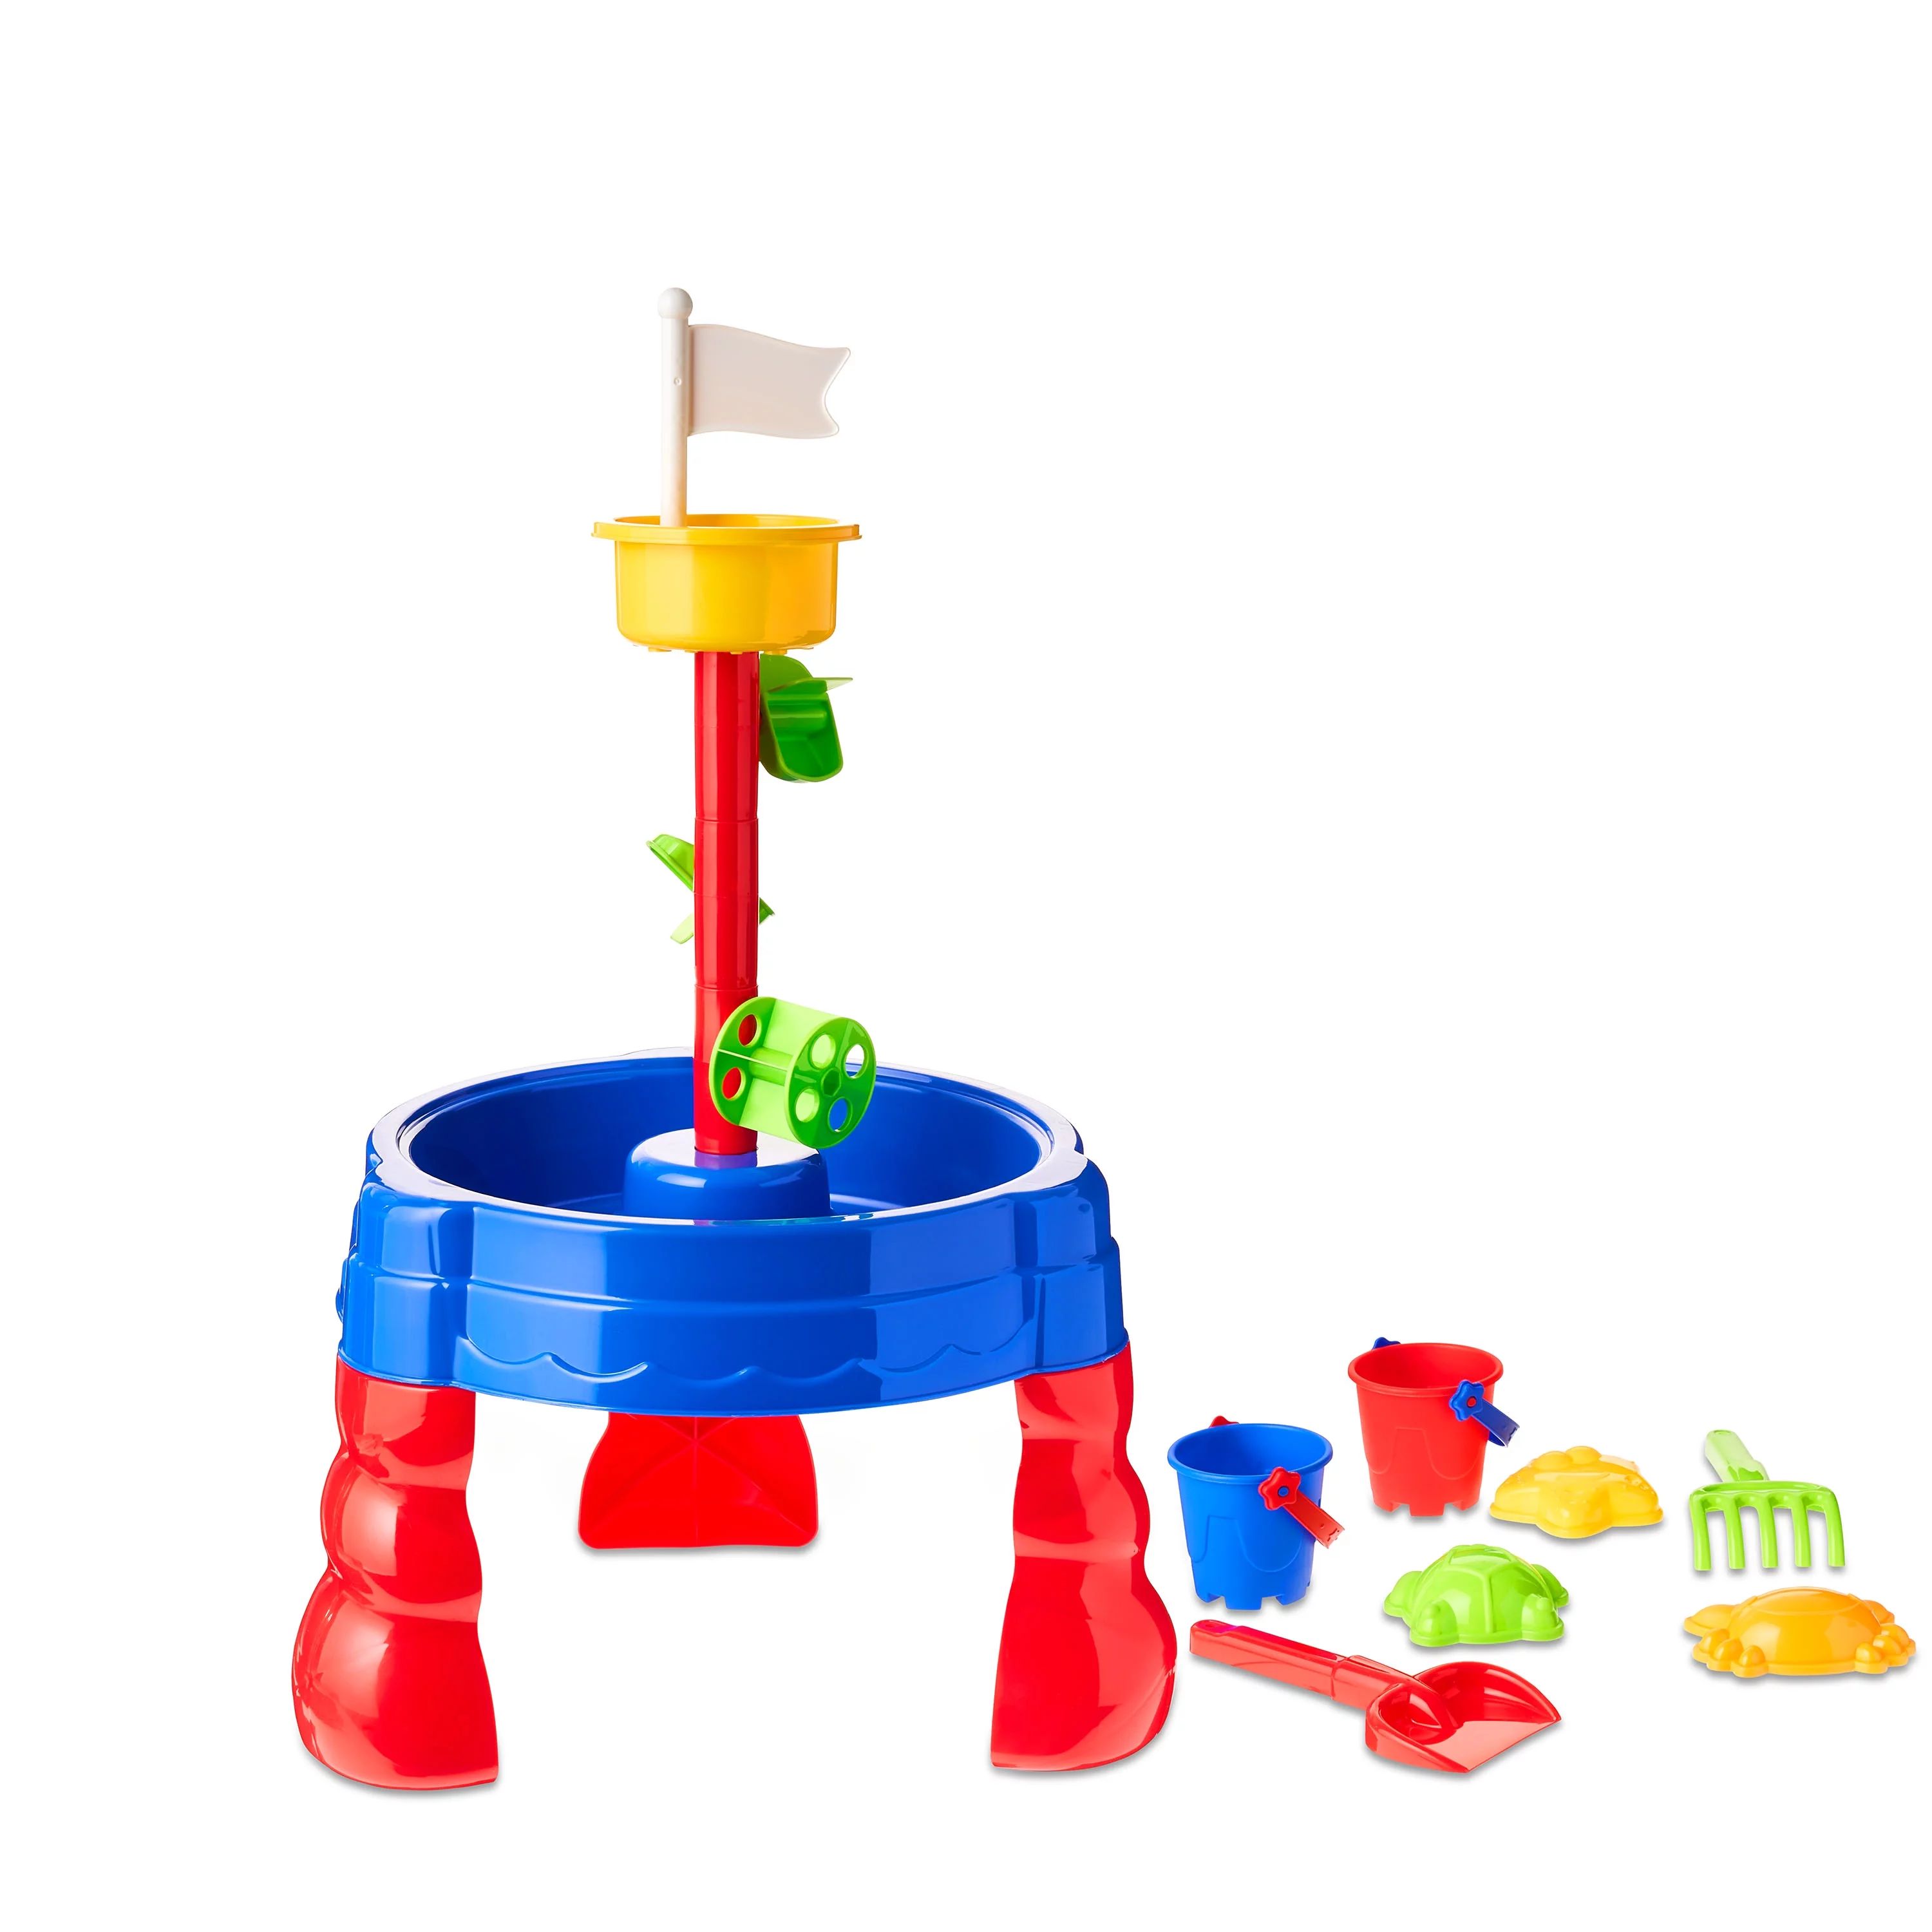 Play Day Sand & Water Table - Creative Toy for Children Ages 3+ | Walmart (US)